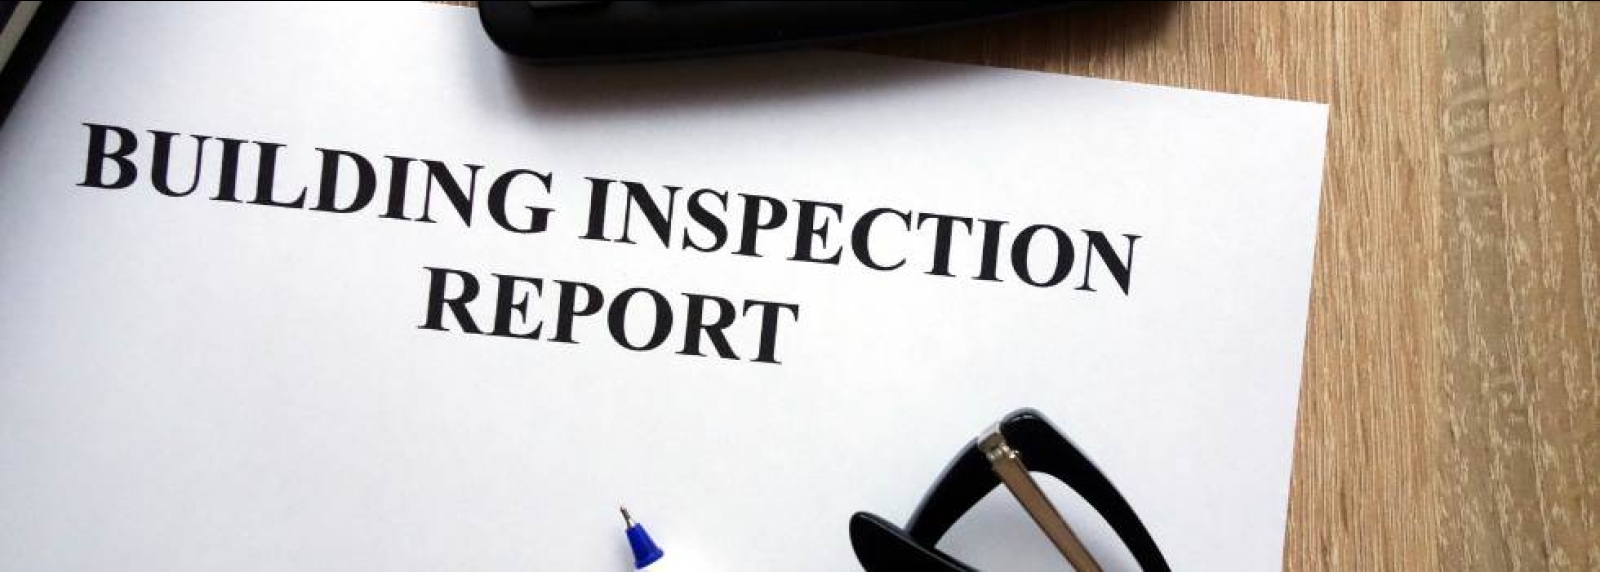 Building Inspection Reports Mallacoota